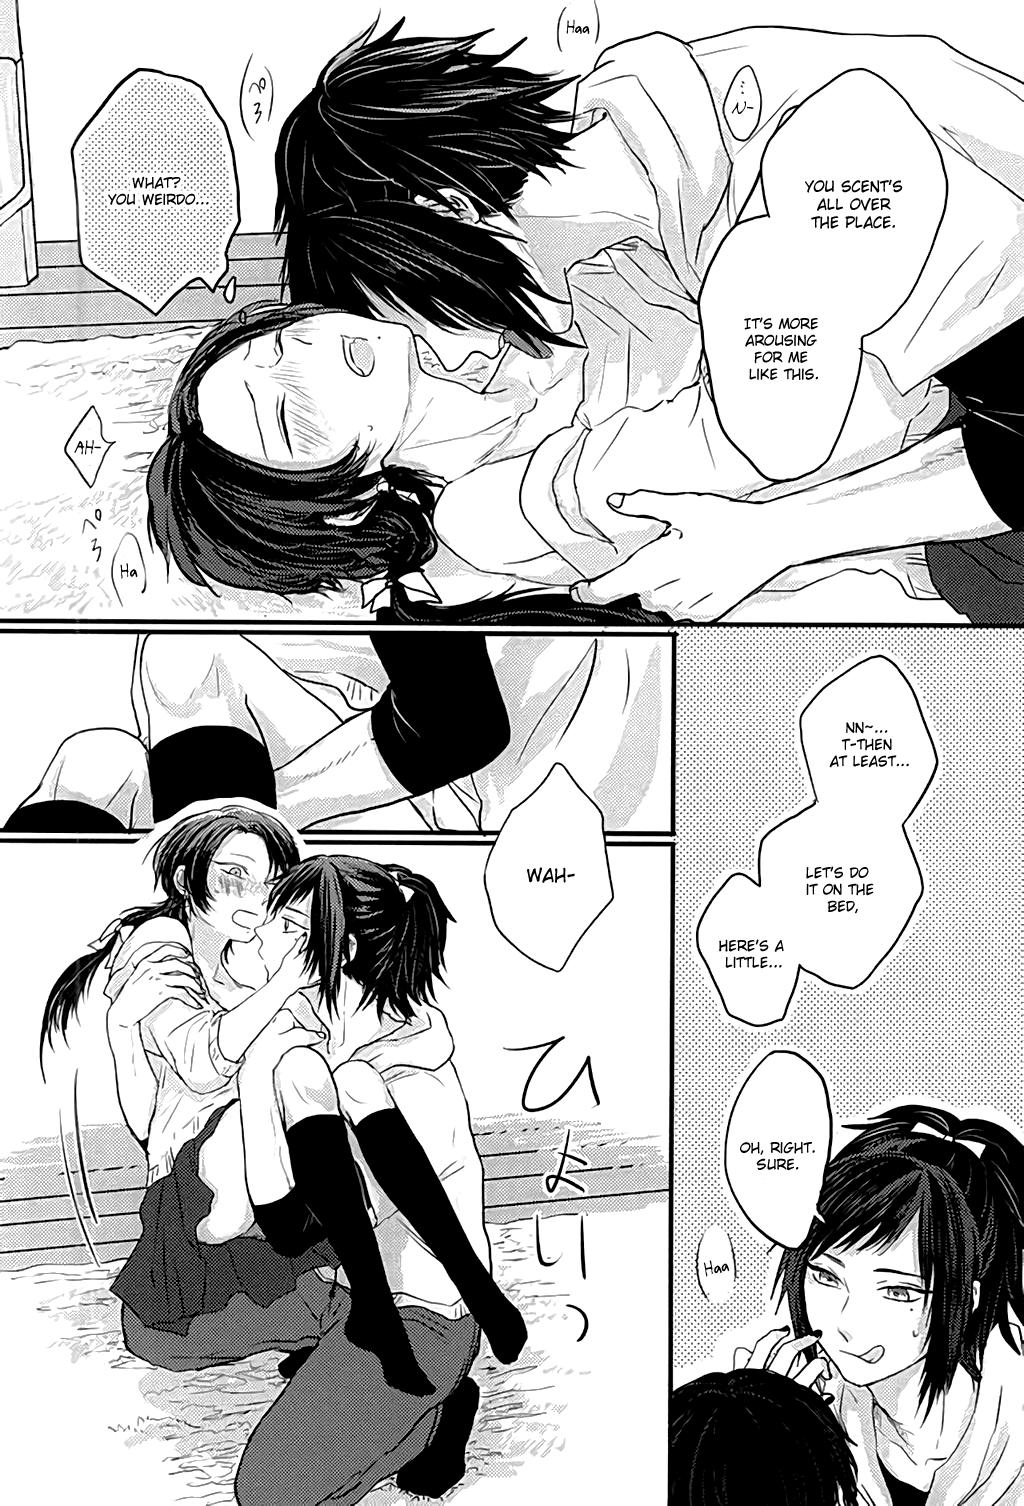 Police After the strawberry - Touken ranbu Threeway - Page 9